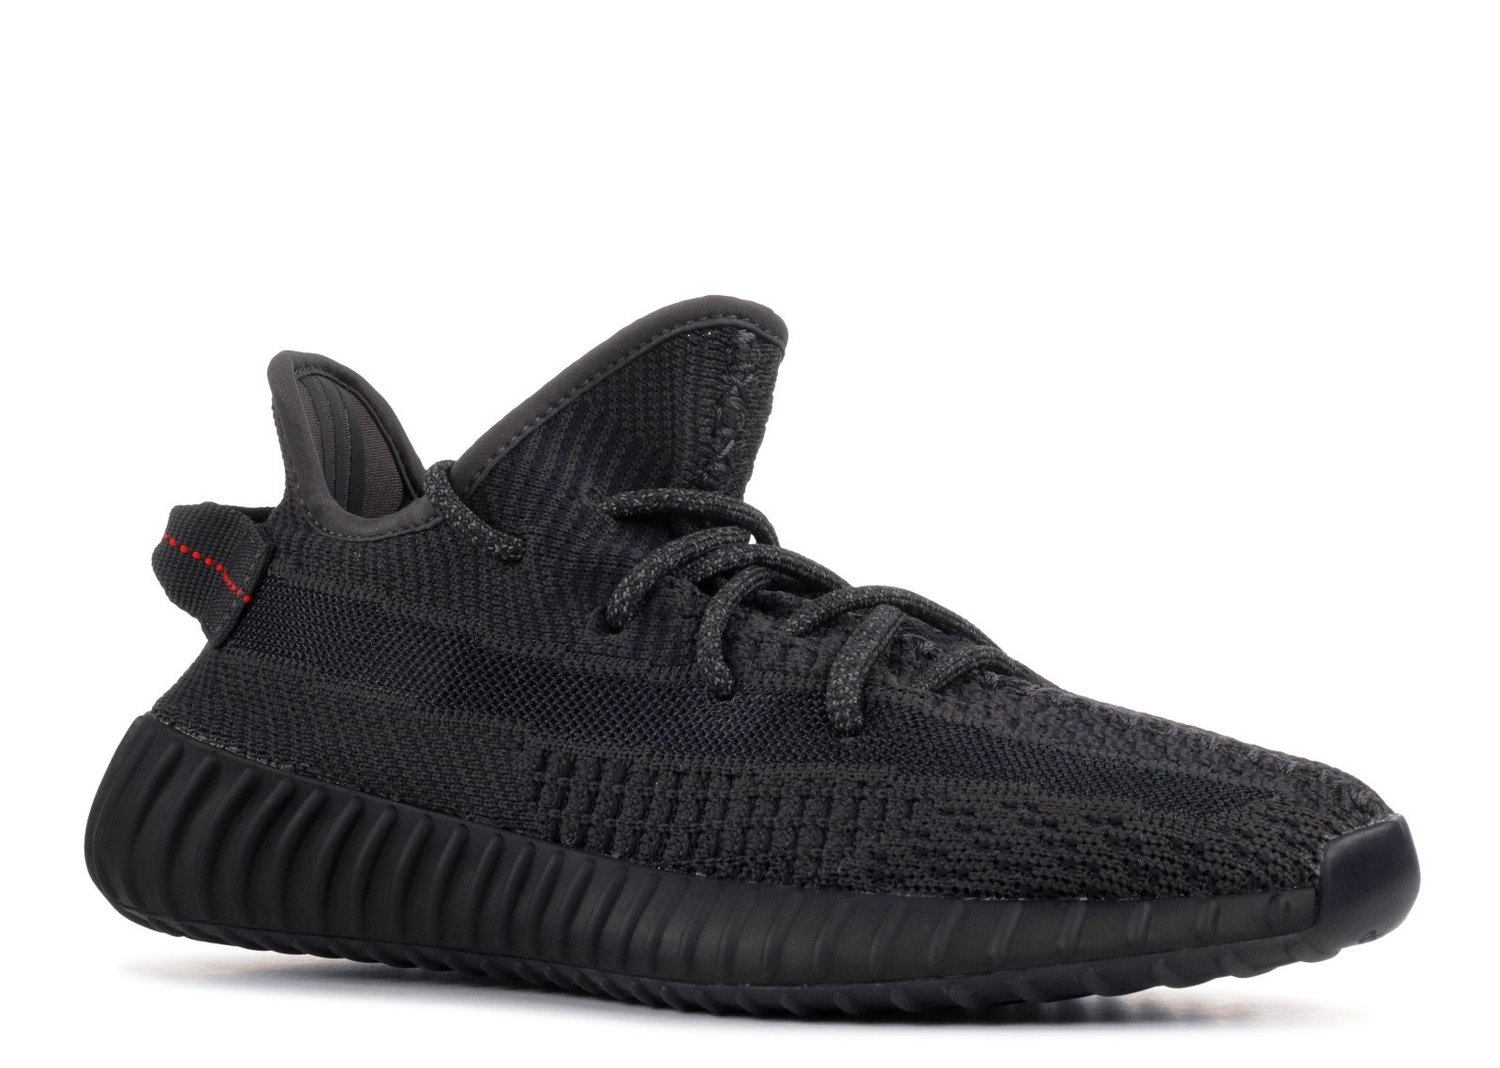 Image of Adidas Yeezy Boost 350 "Black (Non-Reflective) GS 